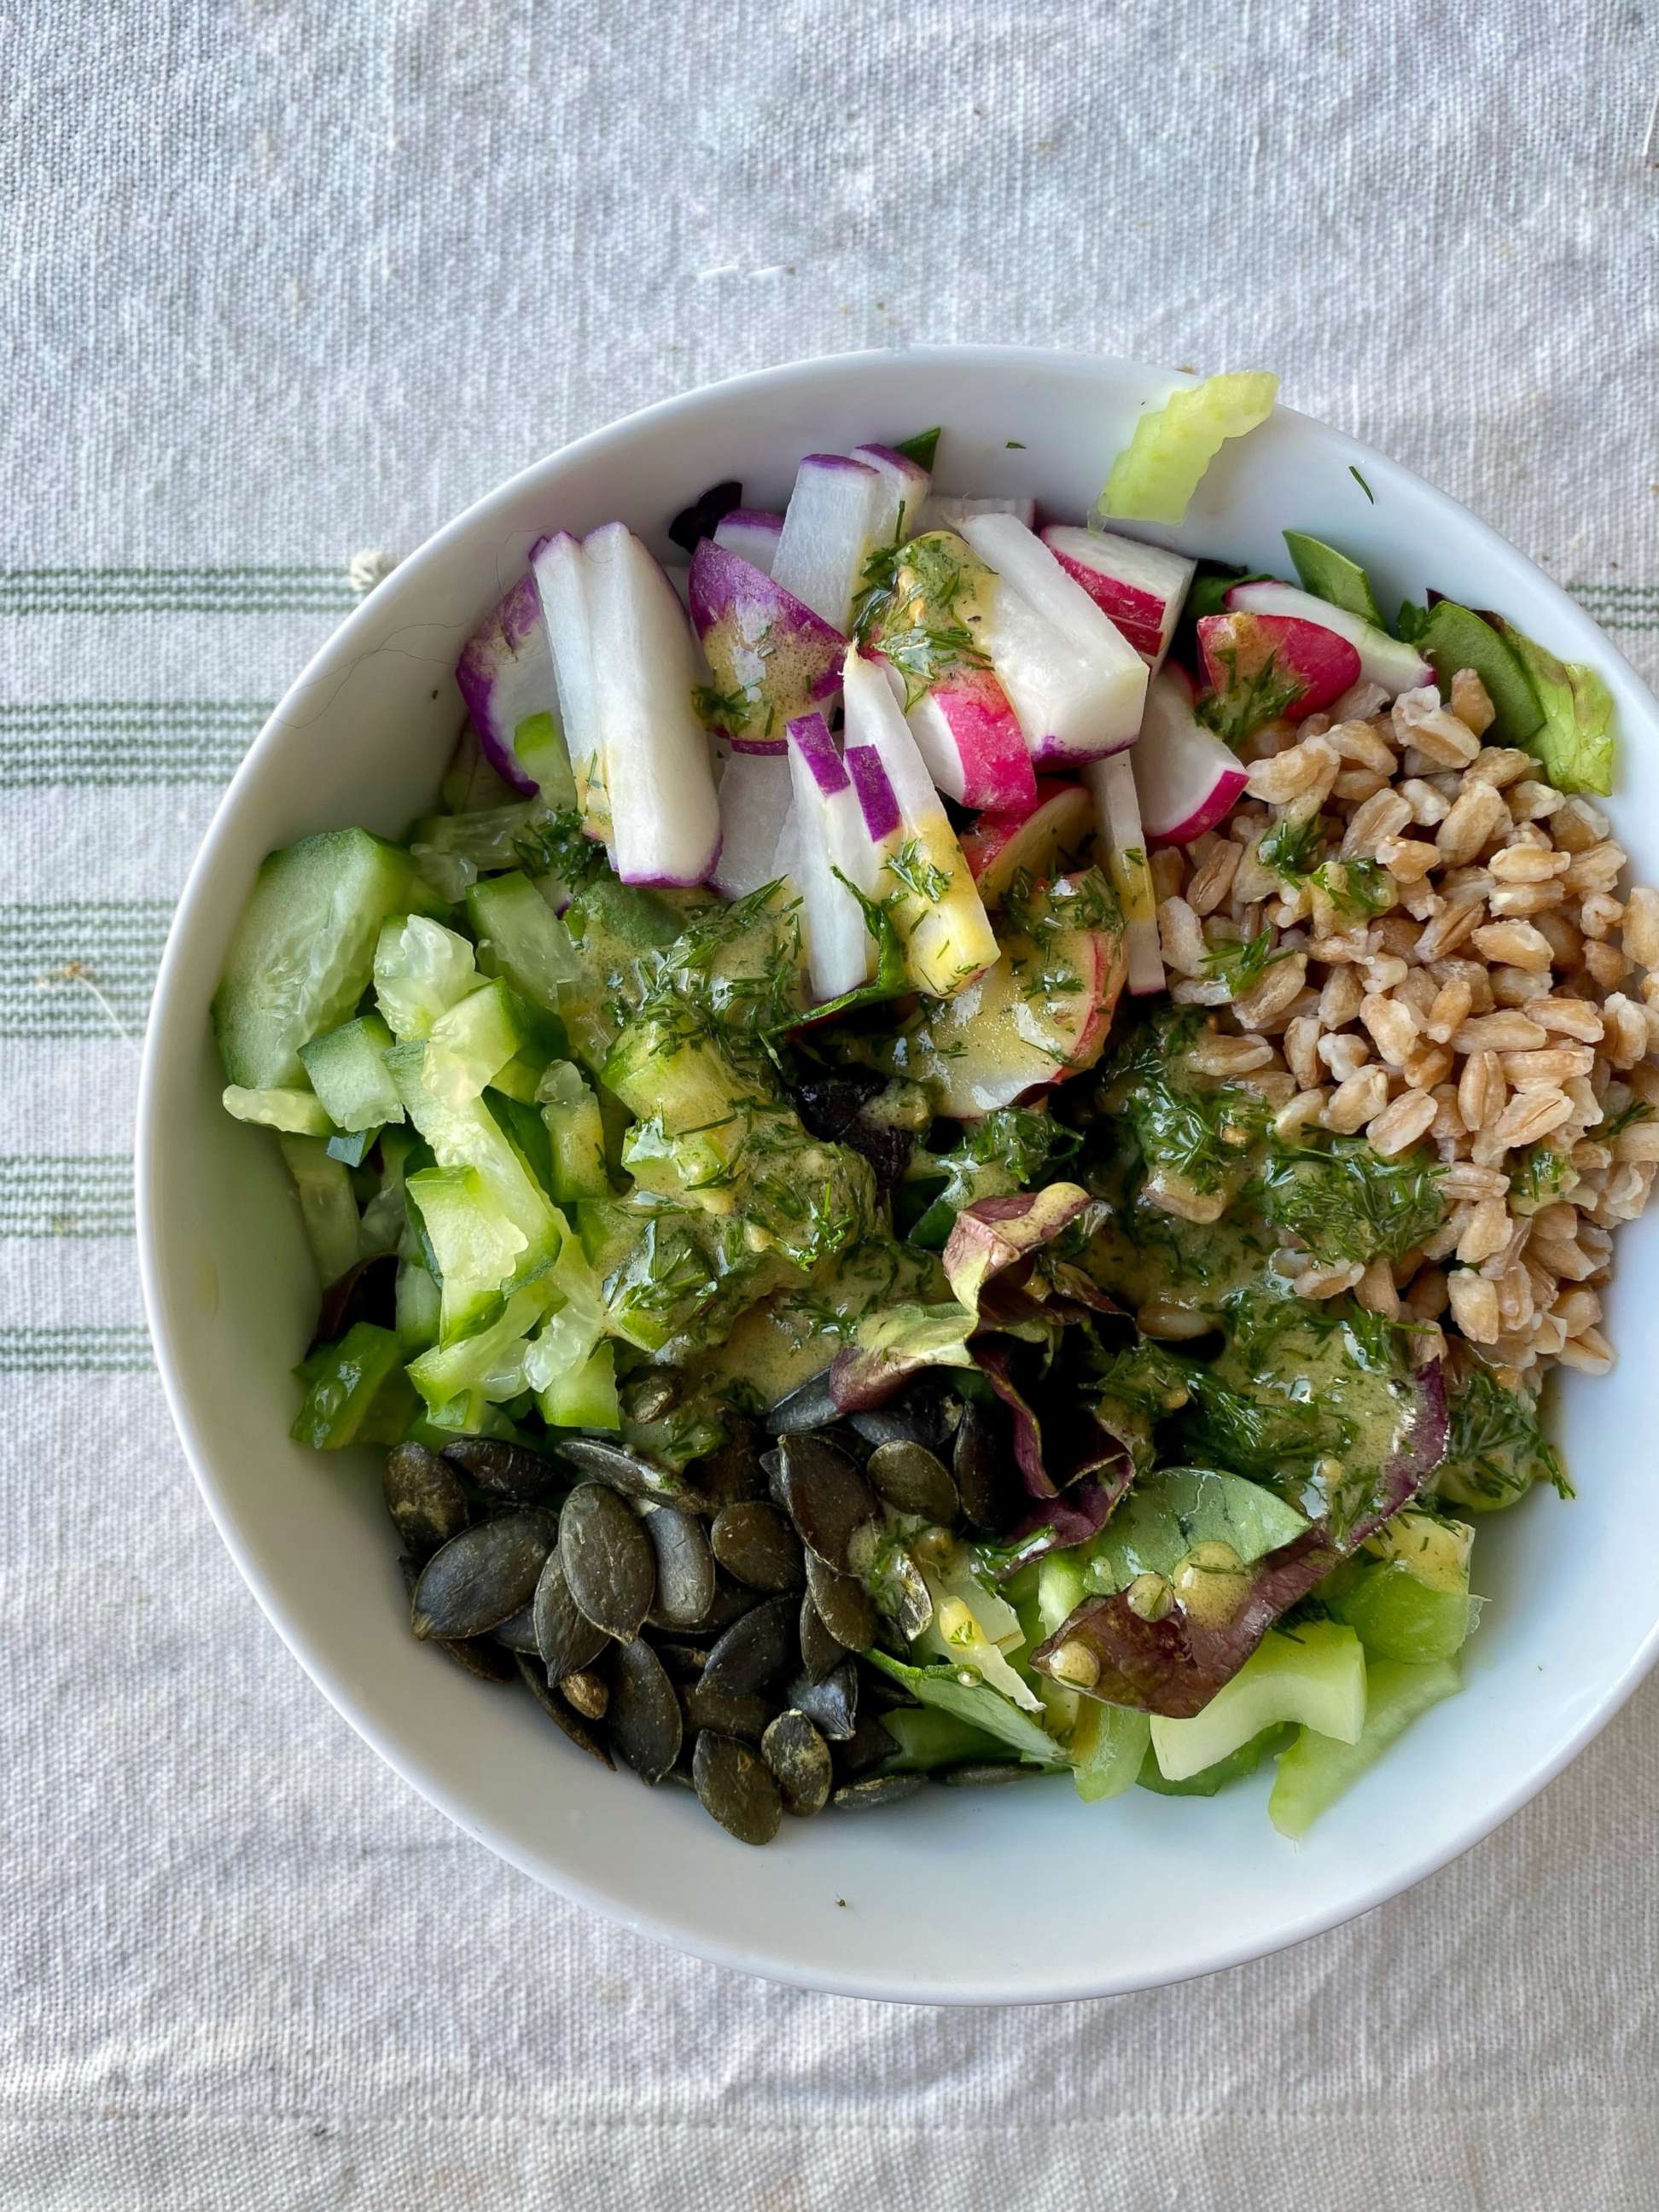 PHOTO: A quick salad and grain bowl with mustard and dill vinaigrette and fresh veggies.